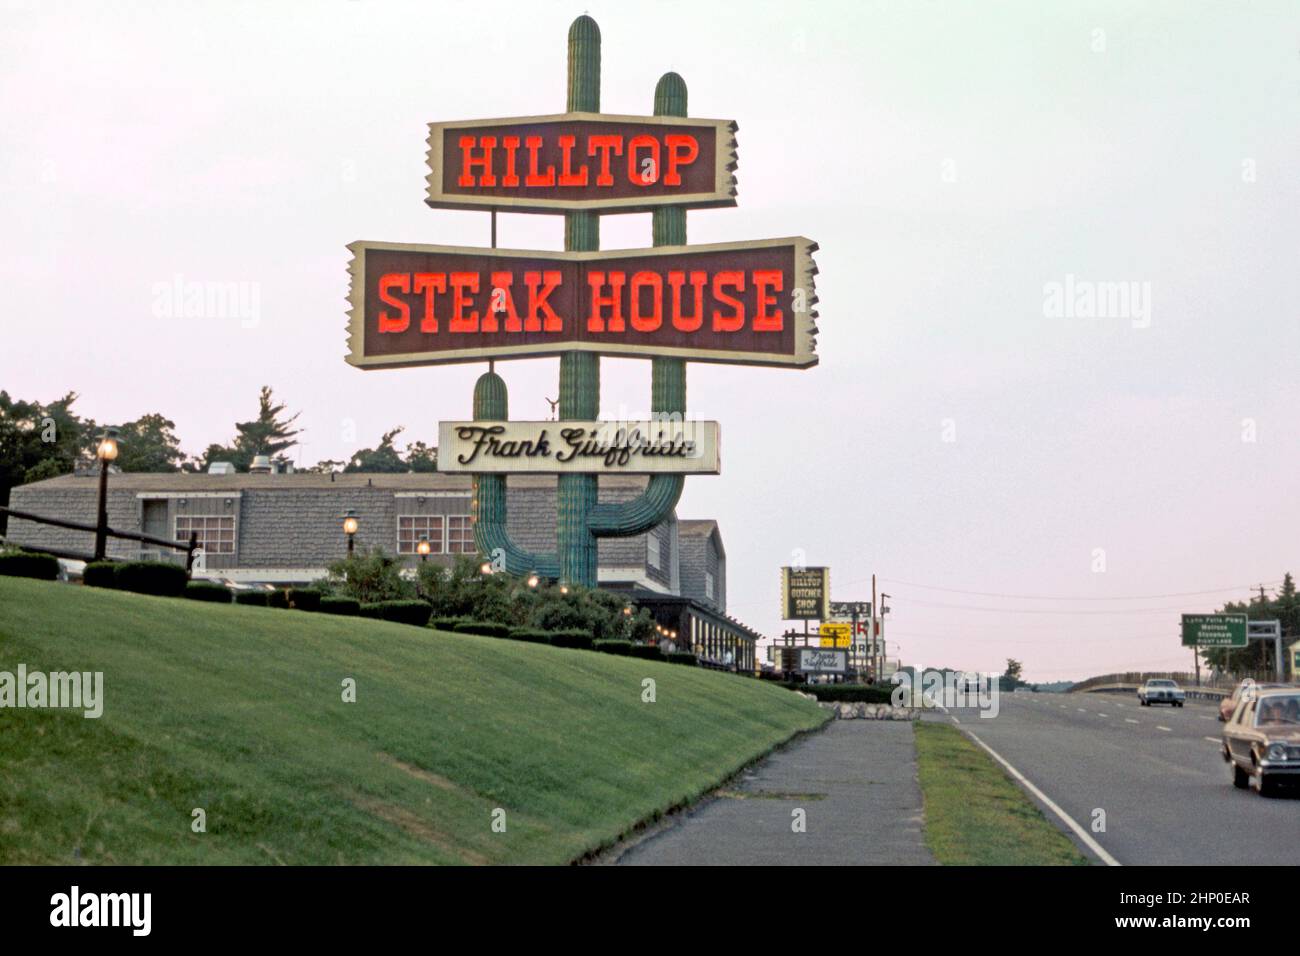 A 1982 view of The Hilltop Steak House restaurant – and its distinctive ‘cactus’ sign – on Route 1 in Saugus, near Boston, Massachusetts, USA. It was founded in 1961 by Frank Giuffrida, a butcher from Lawrence, Massachusetts. He converted a small bar on Route 1 into a 125-seat American steakhouse. The restaurant became popular – later the restaurant's capacity was 1,500 seats. The cactus sign was erected in 1966. It contained 210 fluorescent light bulbs and nearly half a mile of neon tubing. The restaurant closed in 2013 – a vintage 1980s photograph. Stock Photo